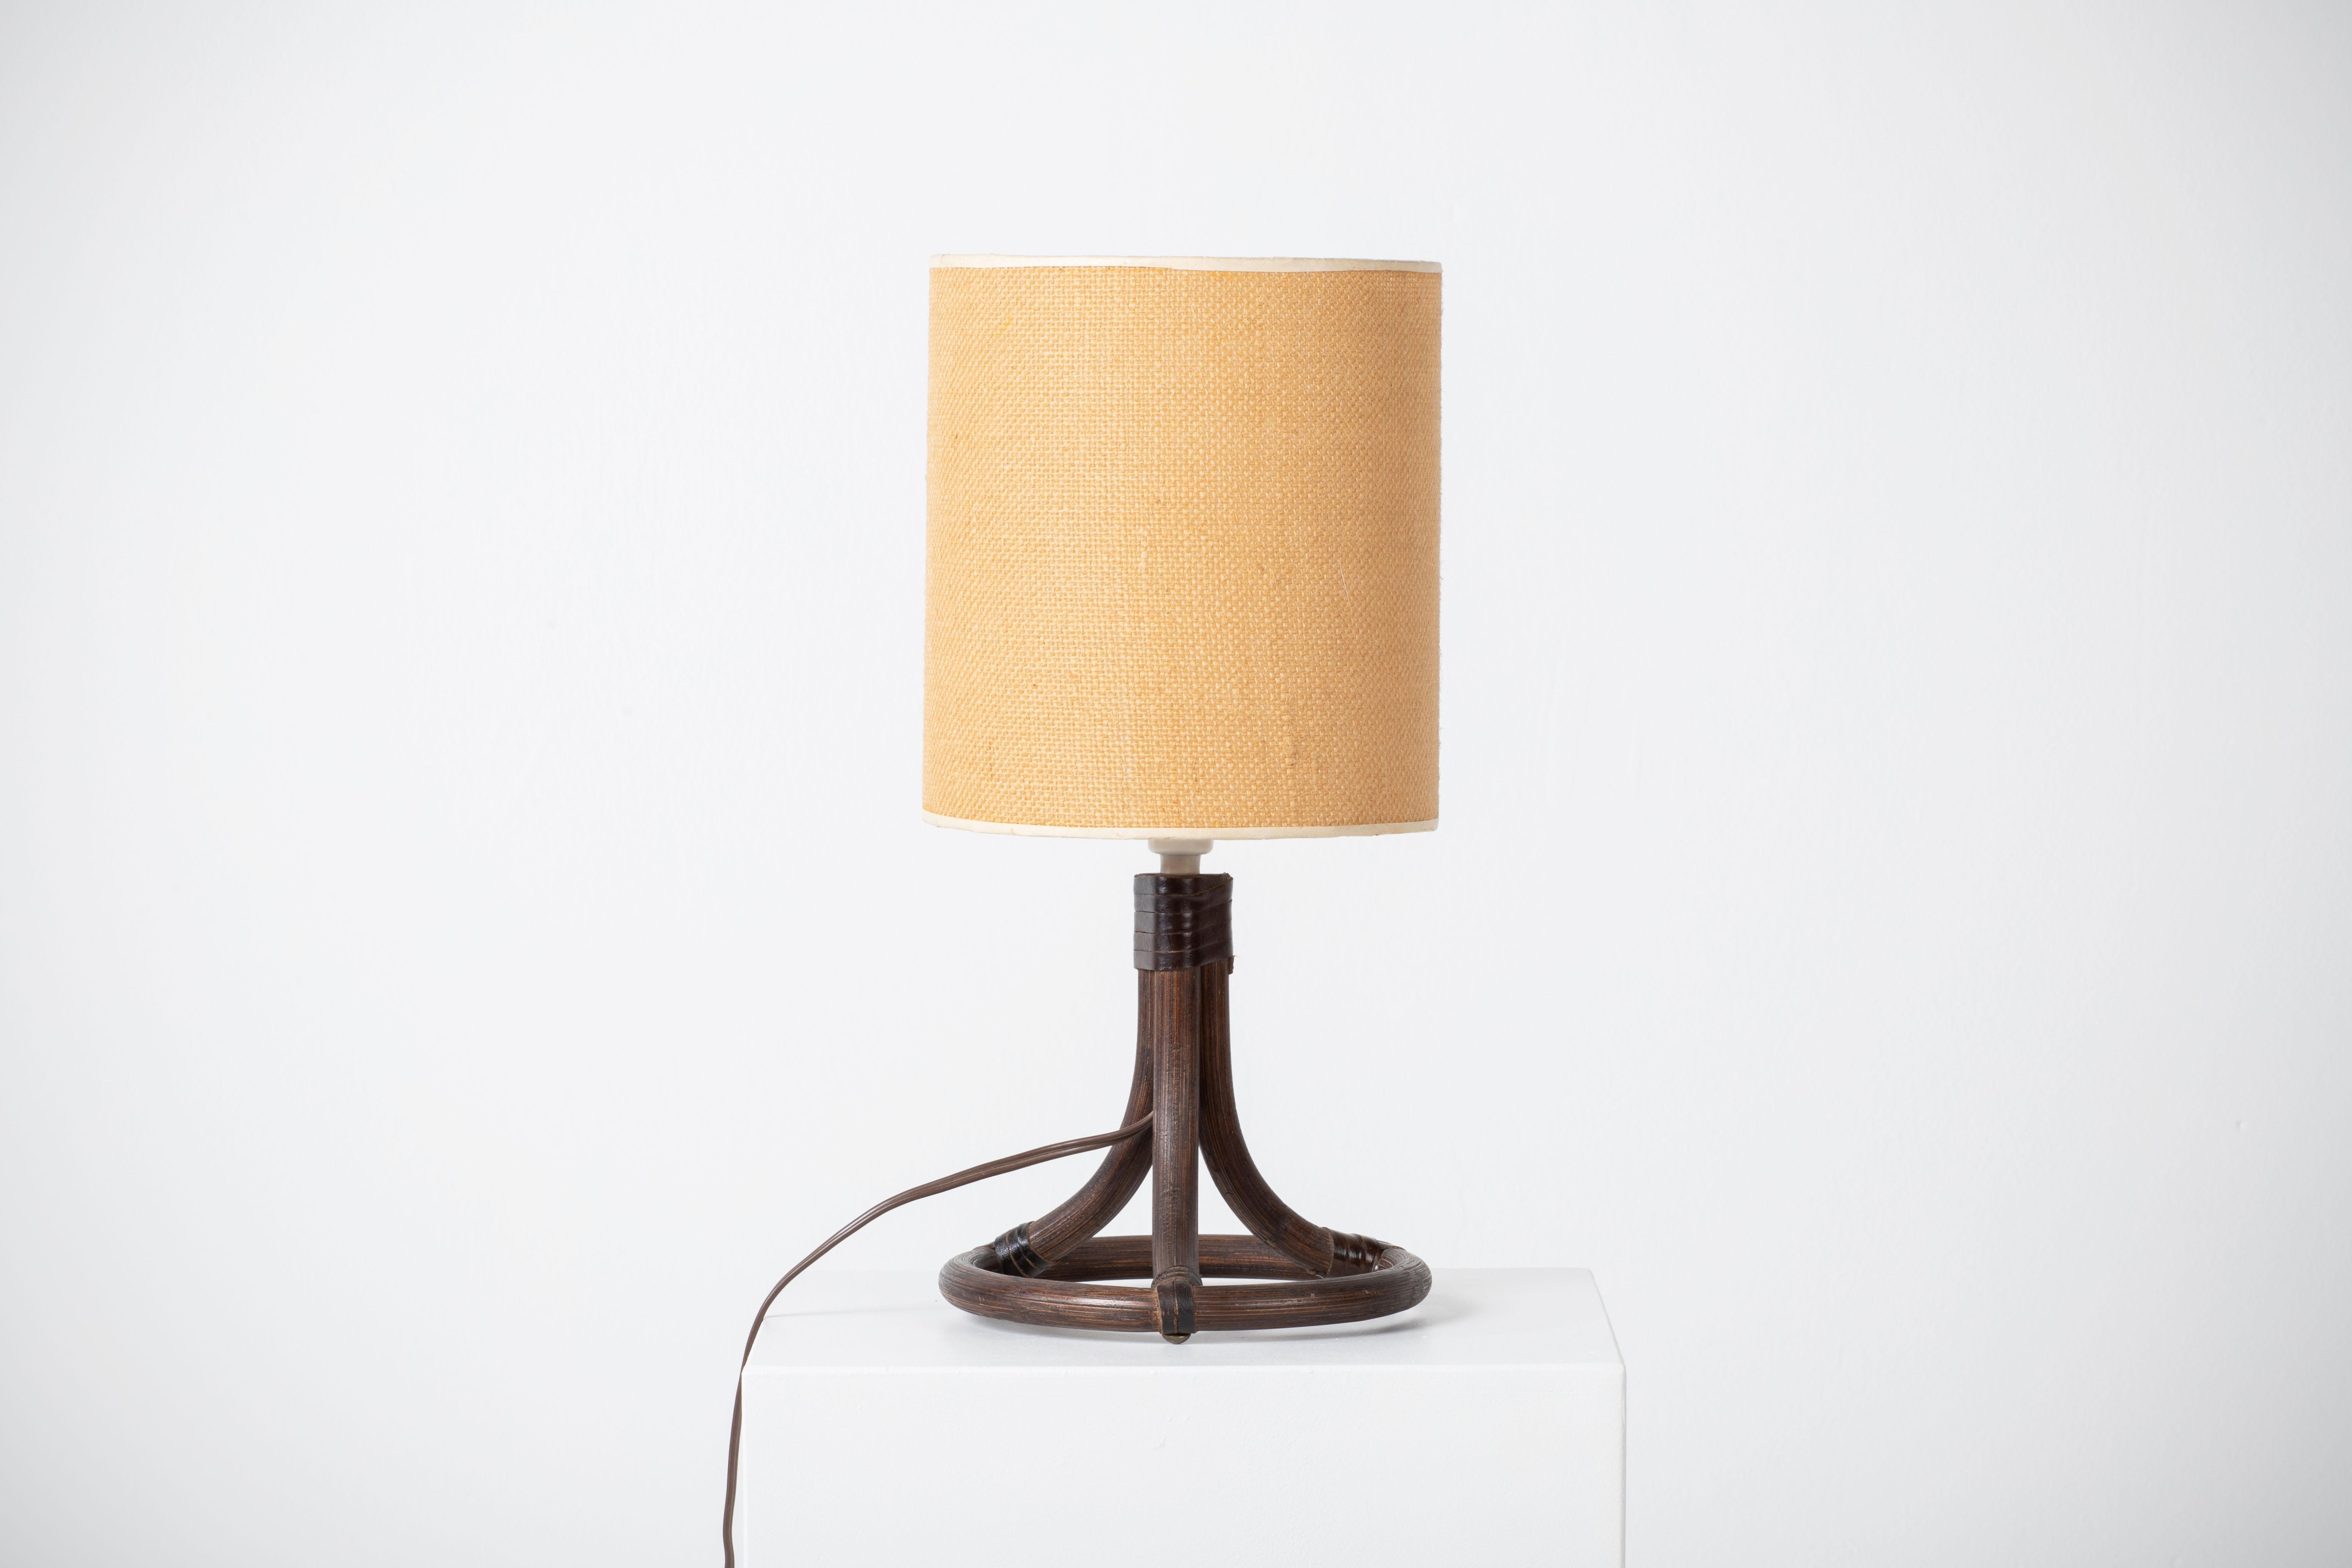 Uno Kristiansson, Table lamps, Solid Pine, Luxus, Sweden, 1960s
It is in good general condition and works perfectly. The lamp offers a warm atmosphere.

Sold with lampshade, total height 37 cm.